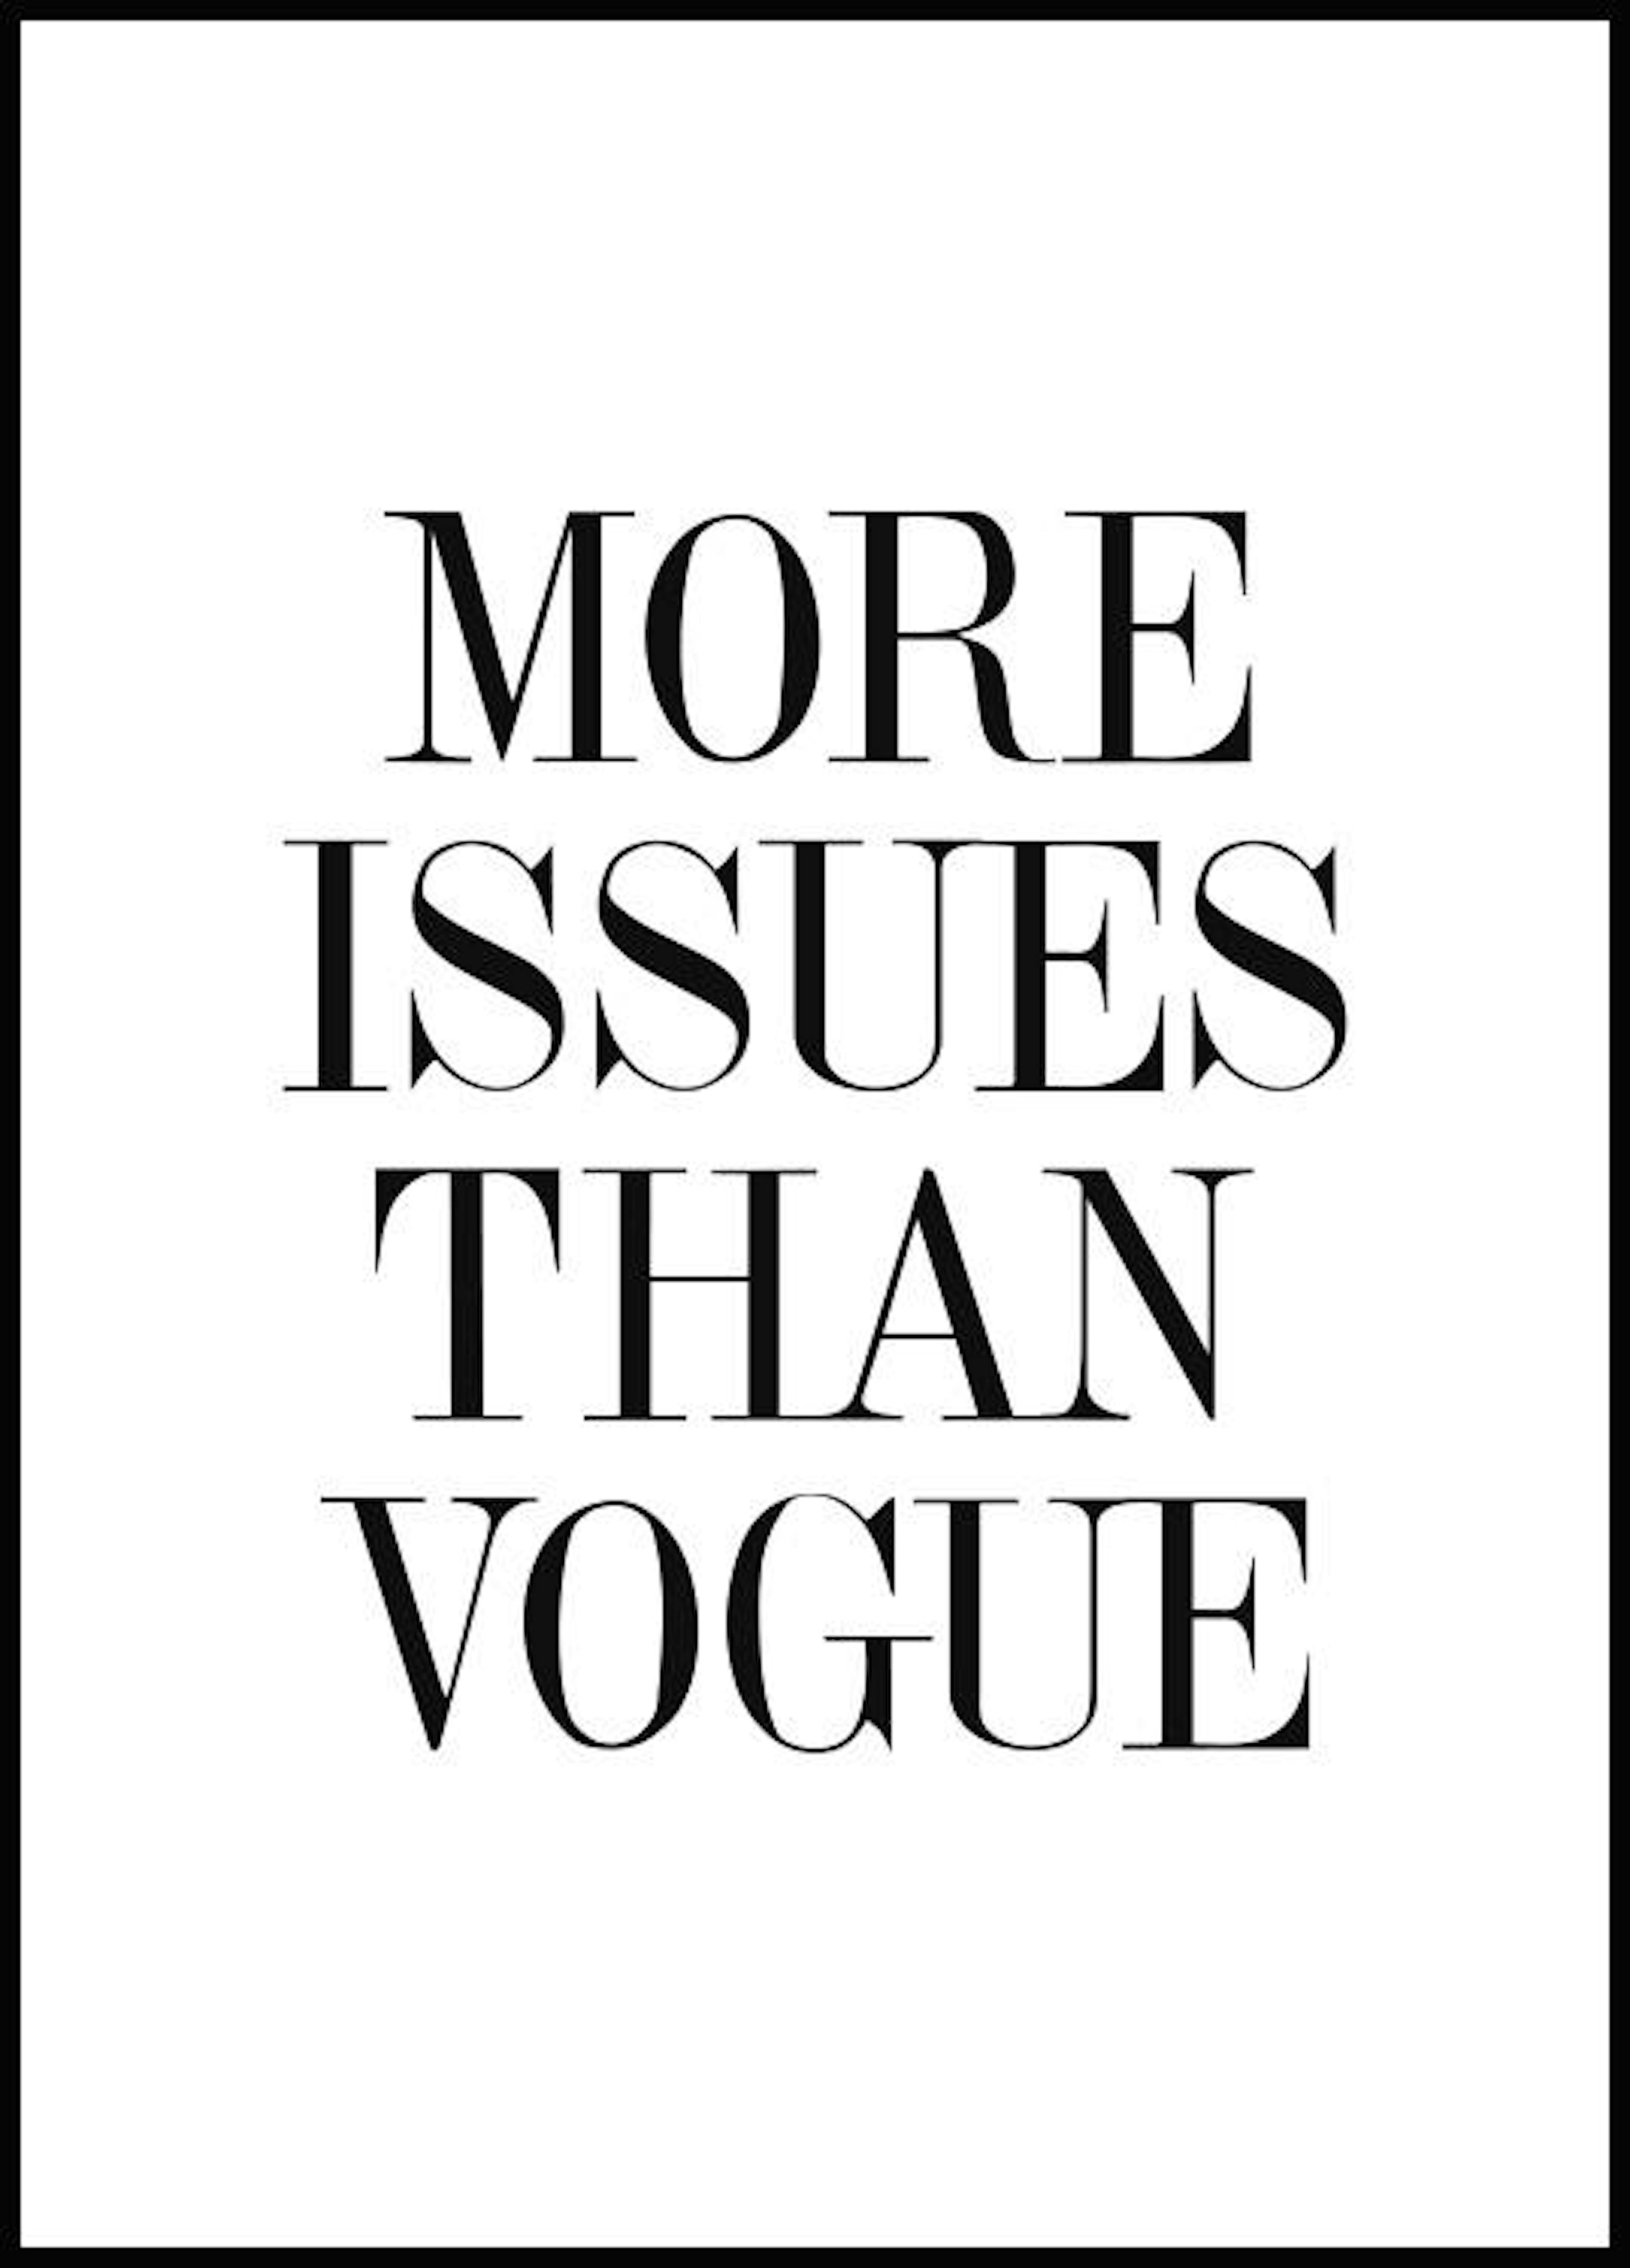 More Issues Than Vogue Poster 0